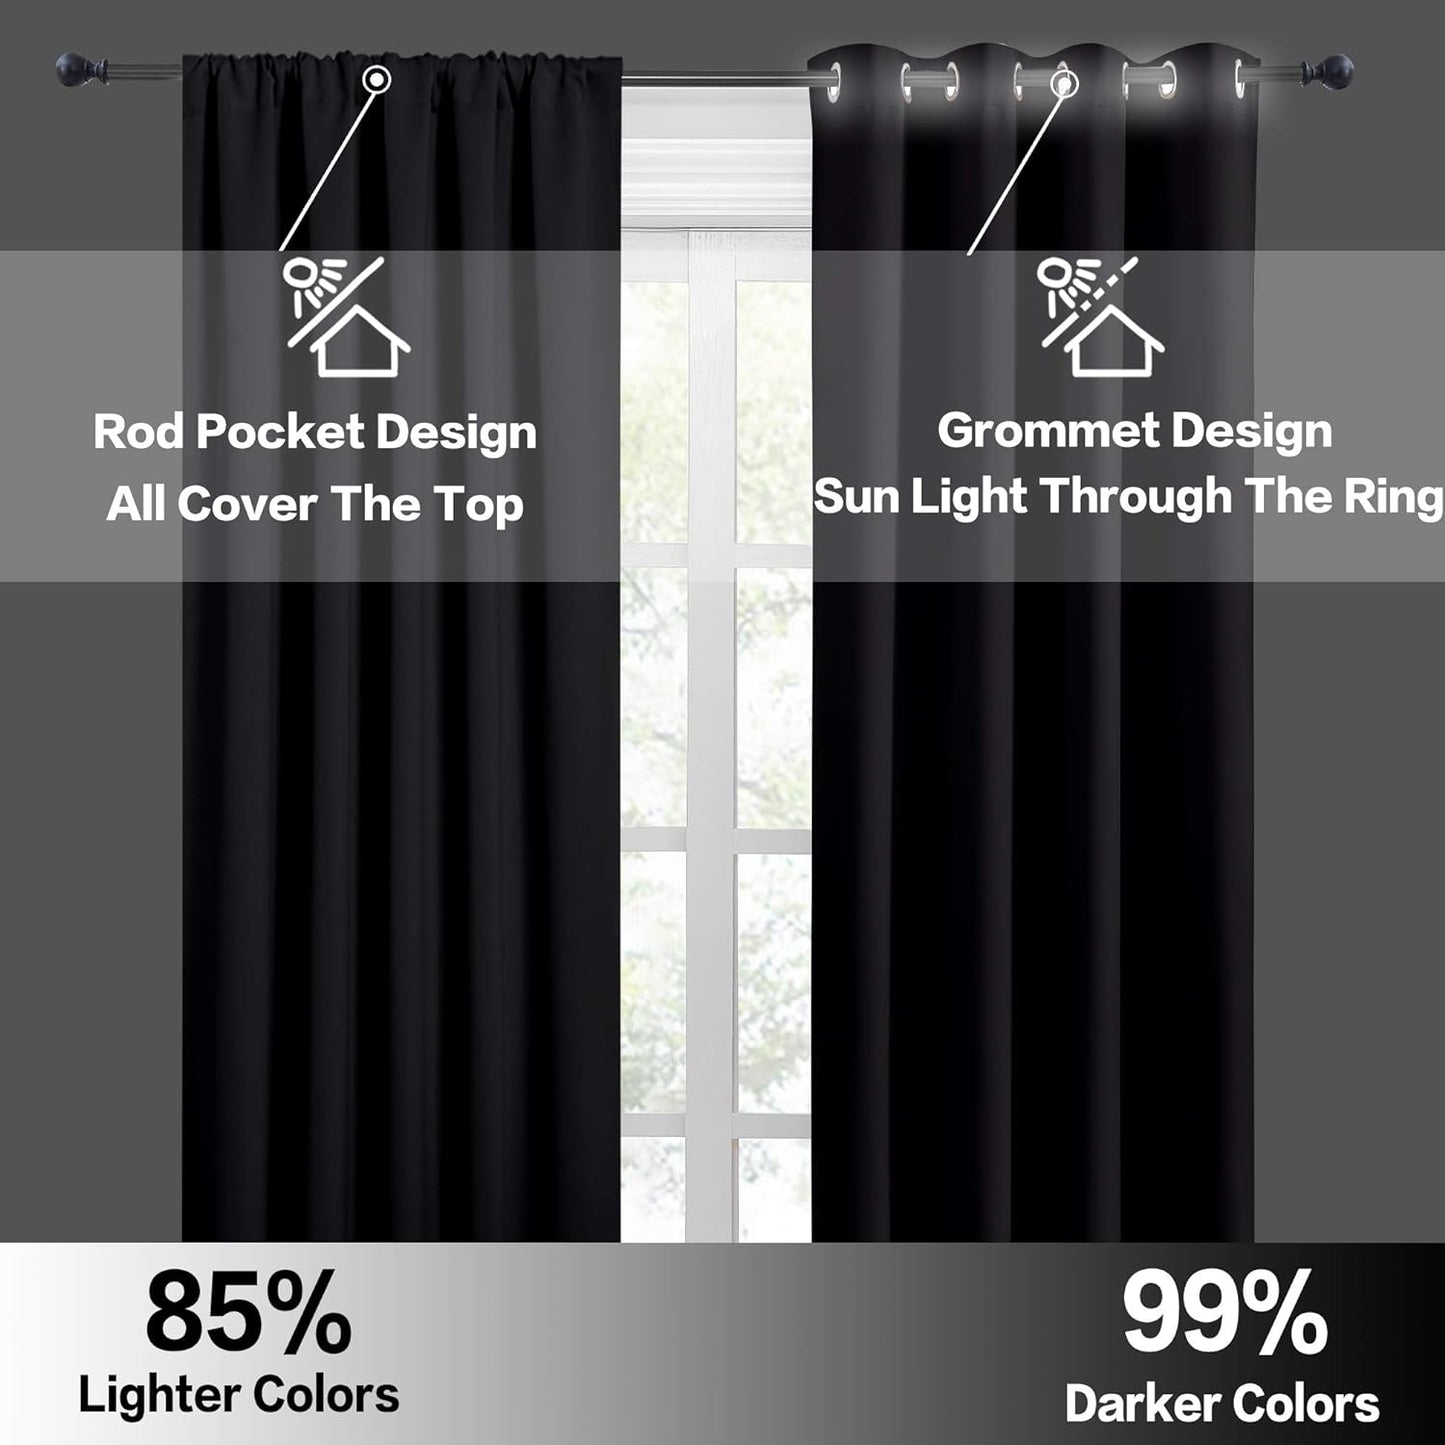 RYB HOME Black Short Curtains Blackout, 45 Inch Durable Cafe Curtains Room Darkening Window Drapes Privacy Protection for Basement Closet Kithen, W29 X L45 Inch, 2 Panels  RYB HOME   